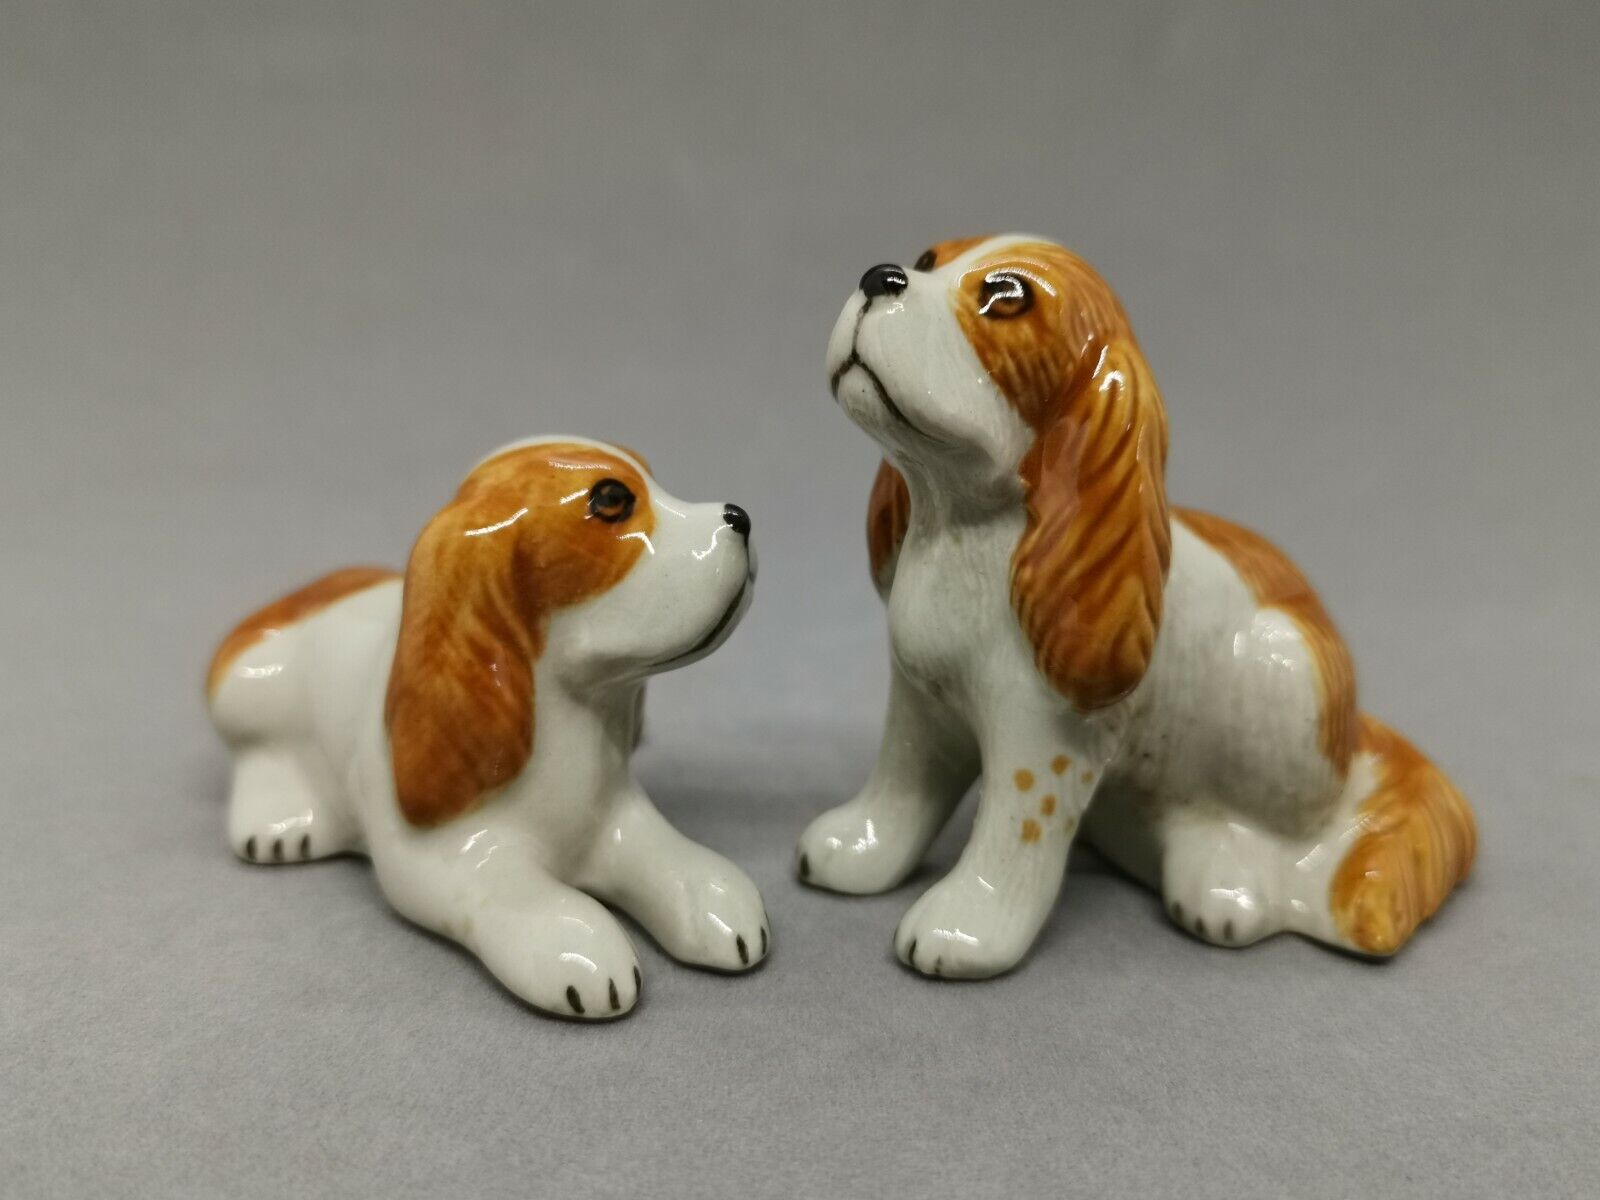 Miniature Ceramic Cavalier King Charles Spaniel For Home And Garden Decoration